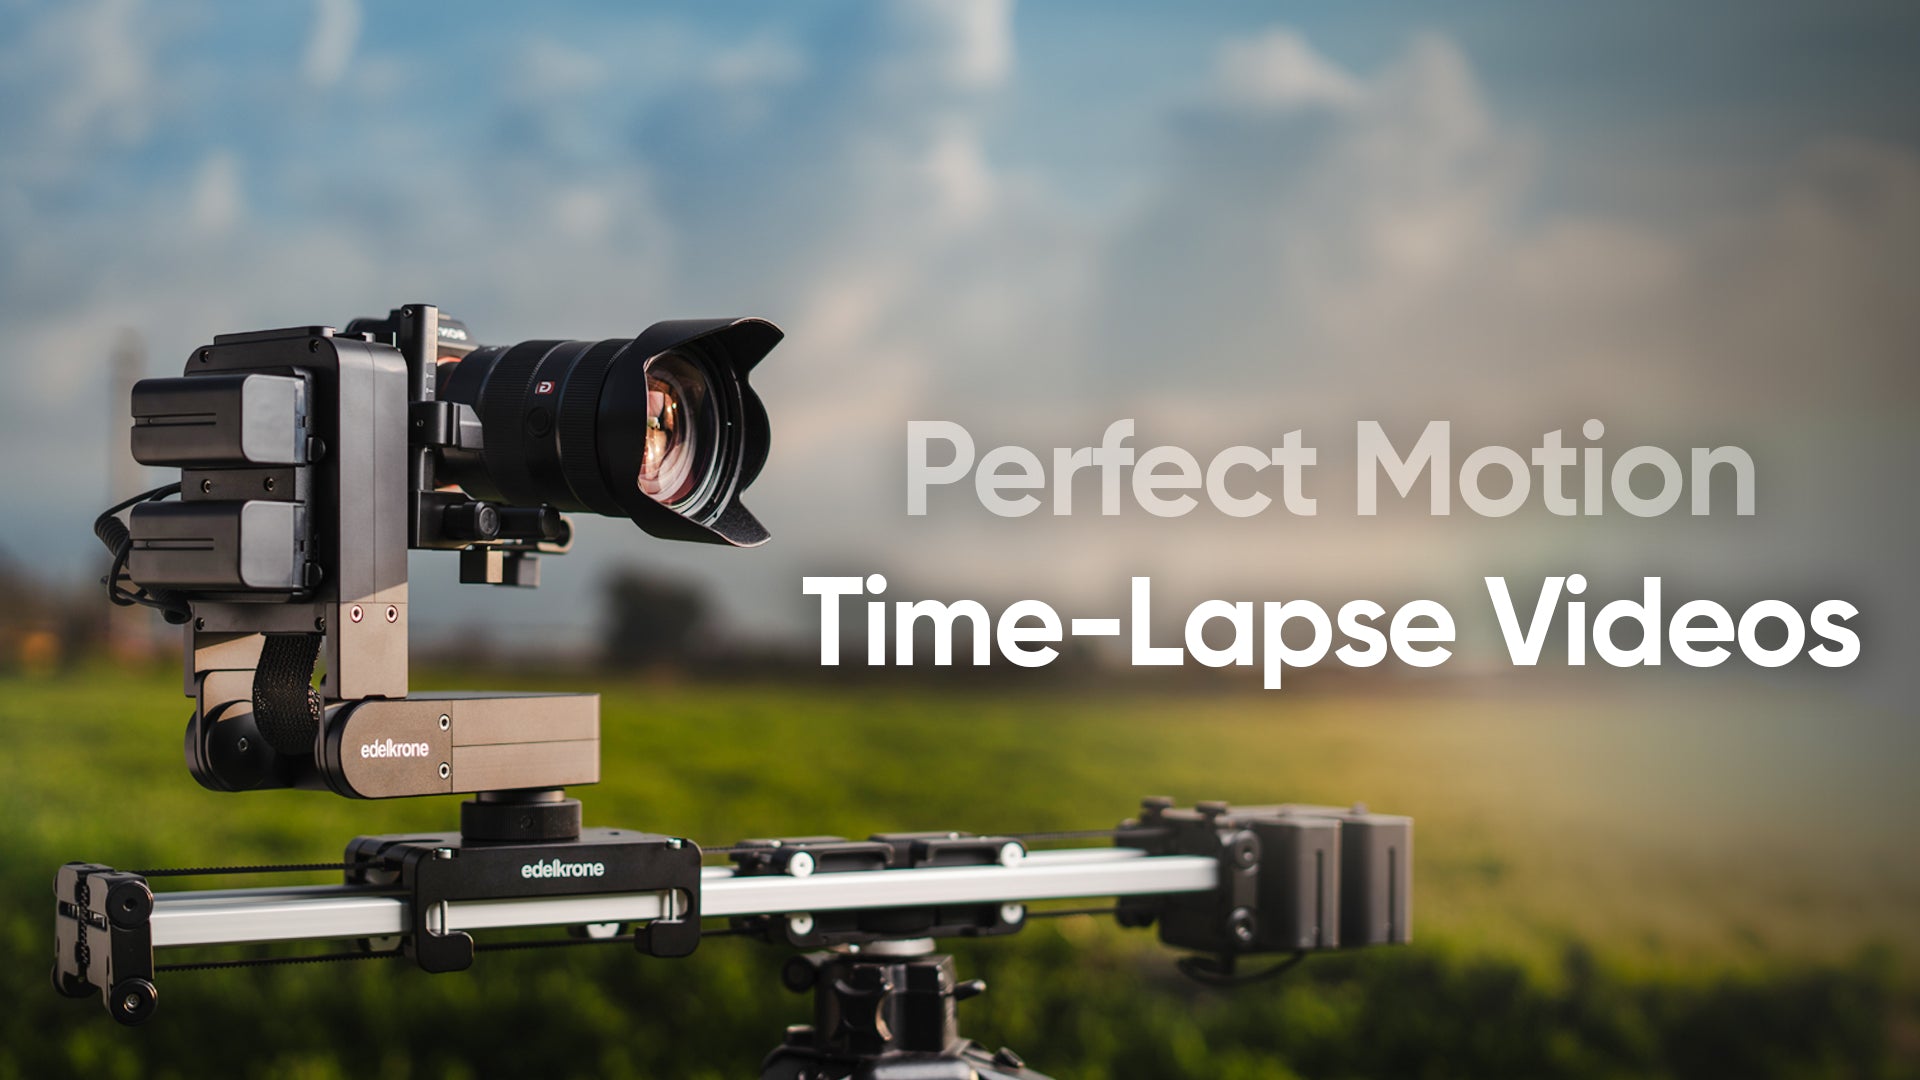 Shoot Perfect Motion Timelapse Videos with edelkrone